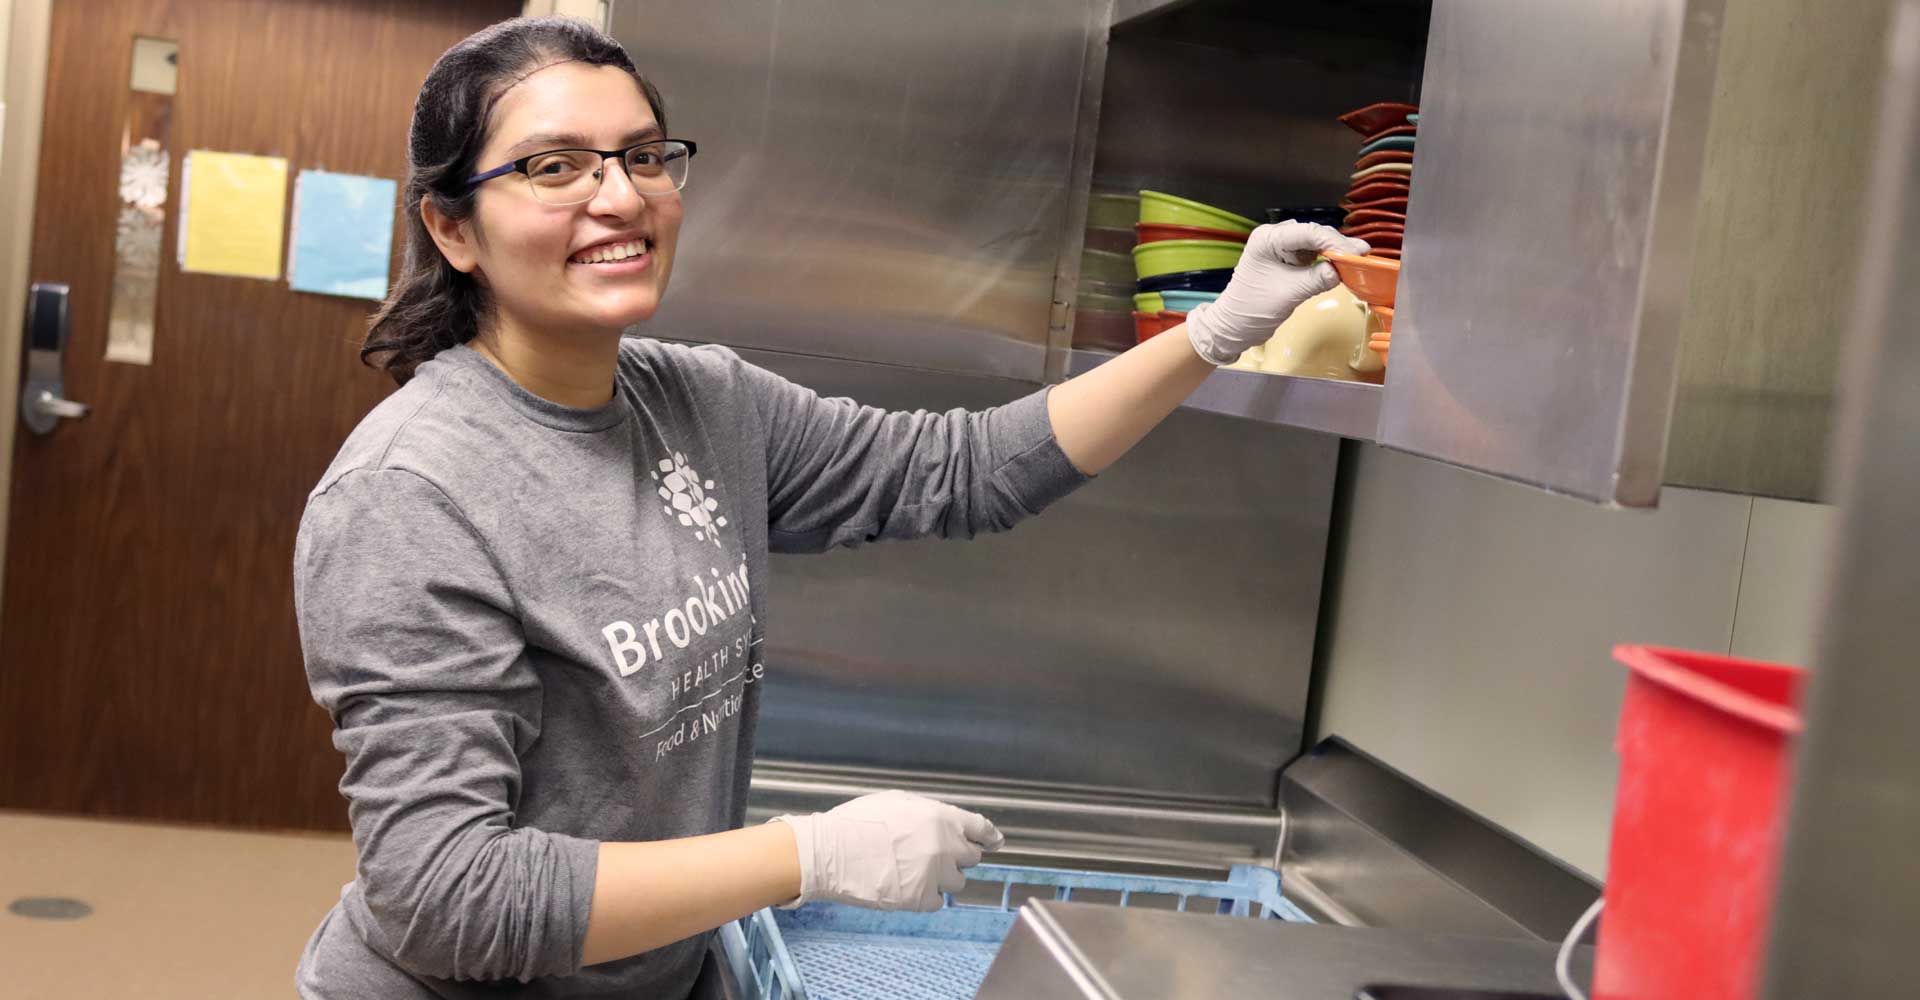 Janhavi, food service worker at The Neighborhoods, putting away dishes in the kitchen and smiling at the camera